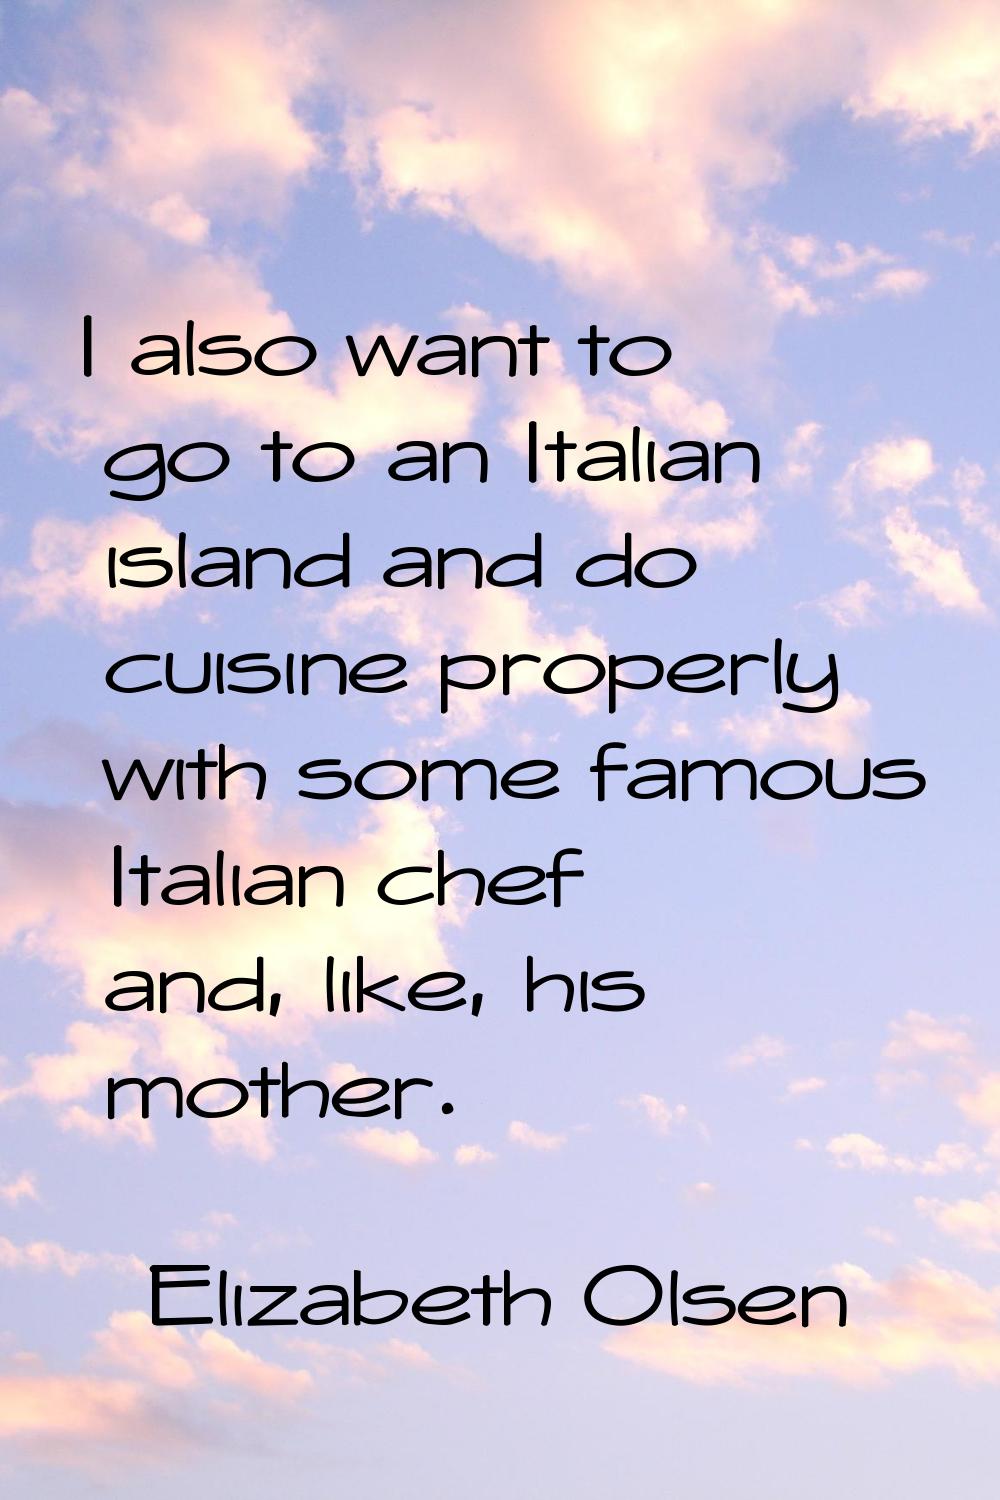 I also want to go to an Italian island and do cuisine properly with some famous Italian chef and, l